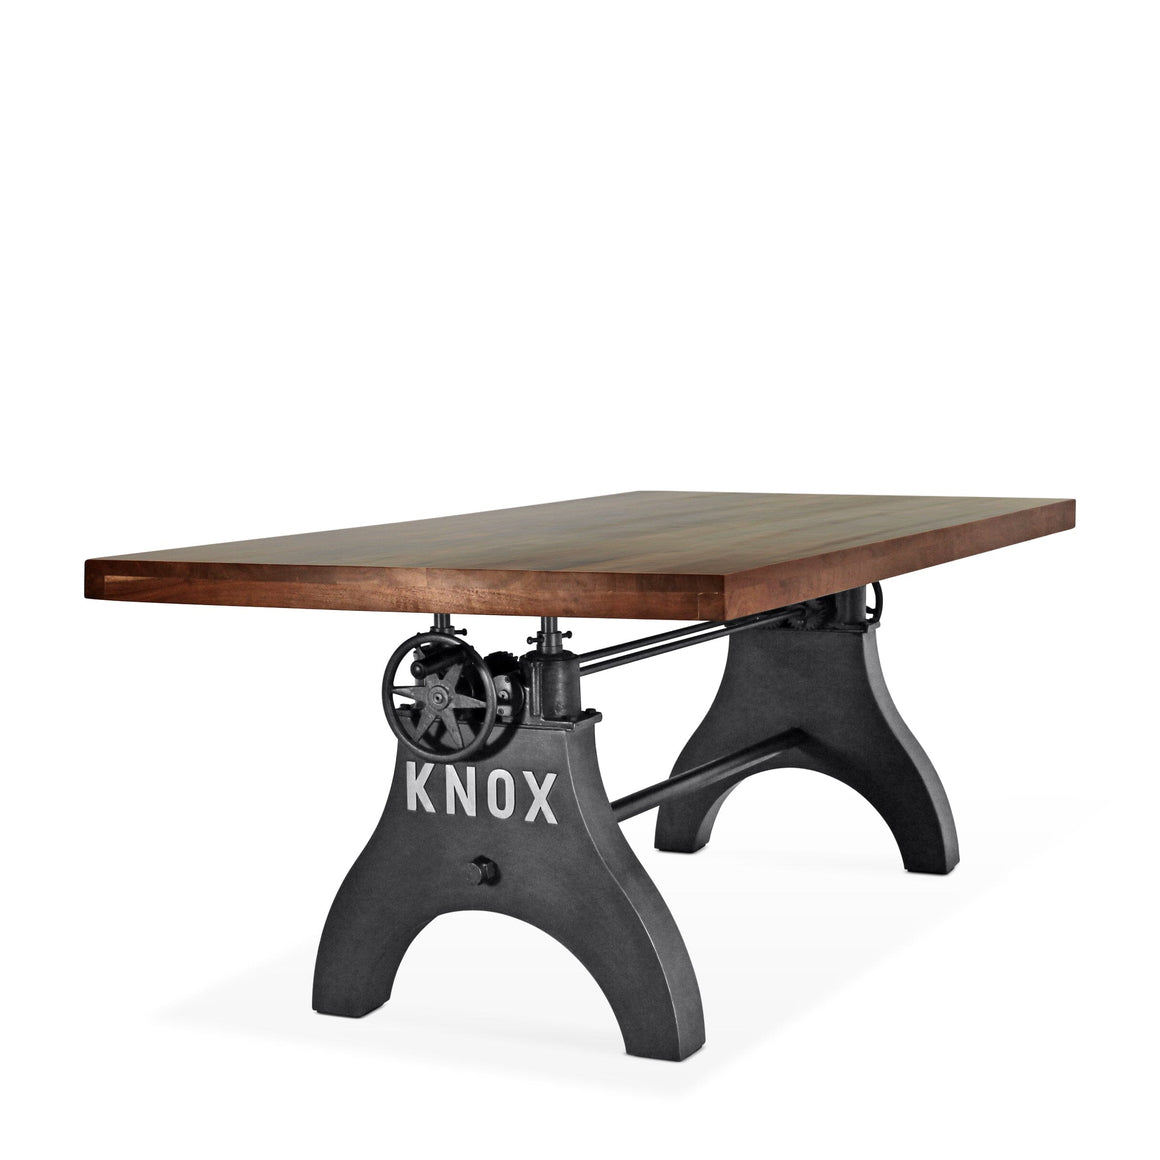 KNOX Adjustable Height Dining Table - Cast Iron Crank Base - Walnut Top Dining Table Rustic Deco